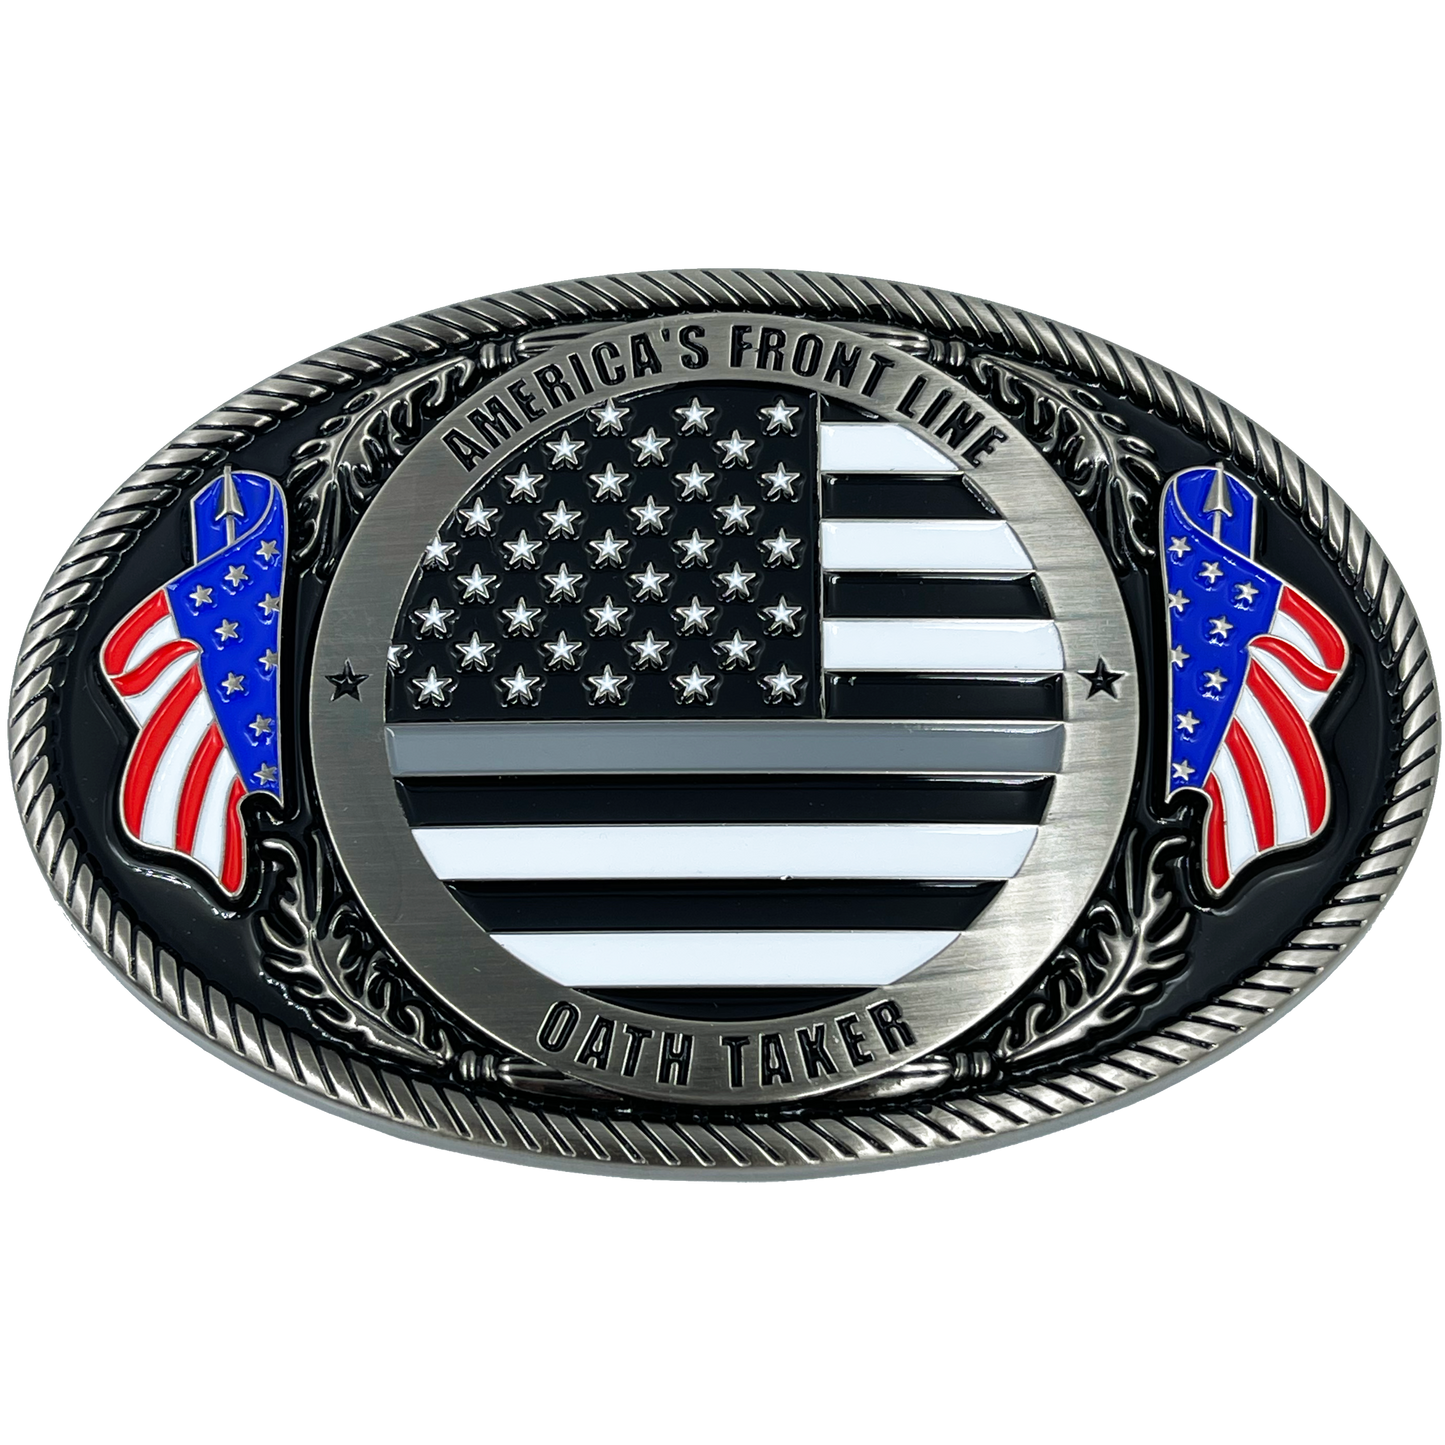 EL4-008 Correctional Officer Antique Nickel Thin Gray Line CO Police American Flag Corrections Belt Buckle America's Front Line Oath Taker